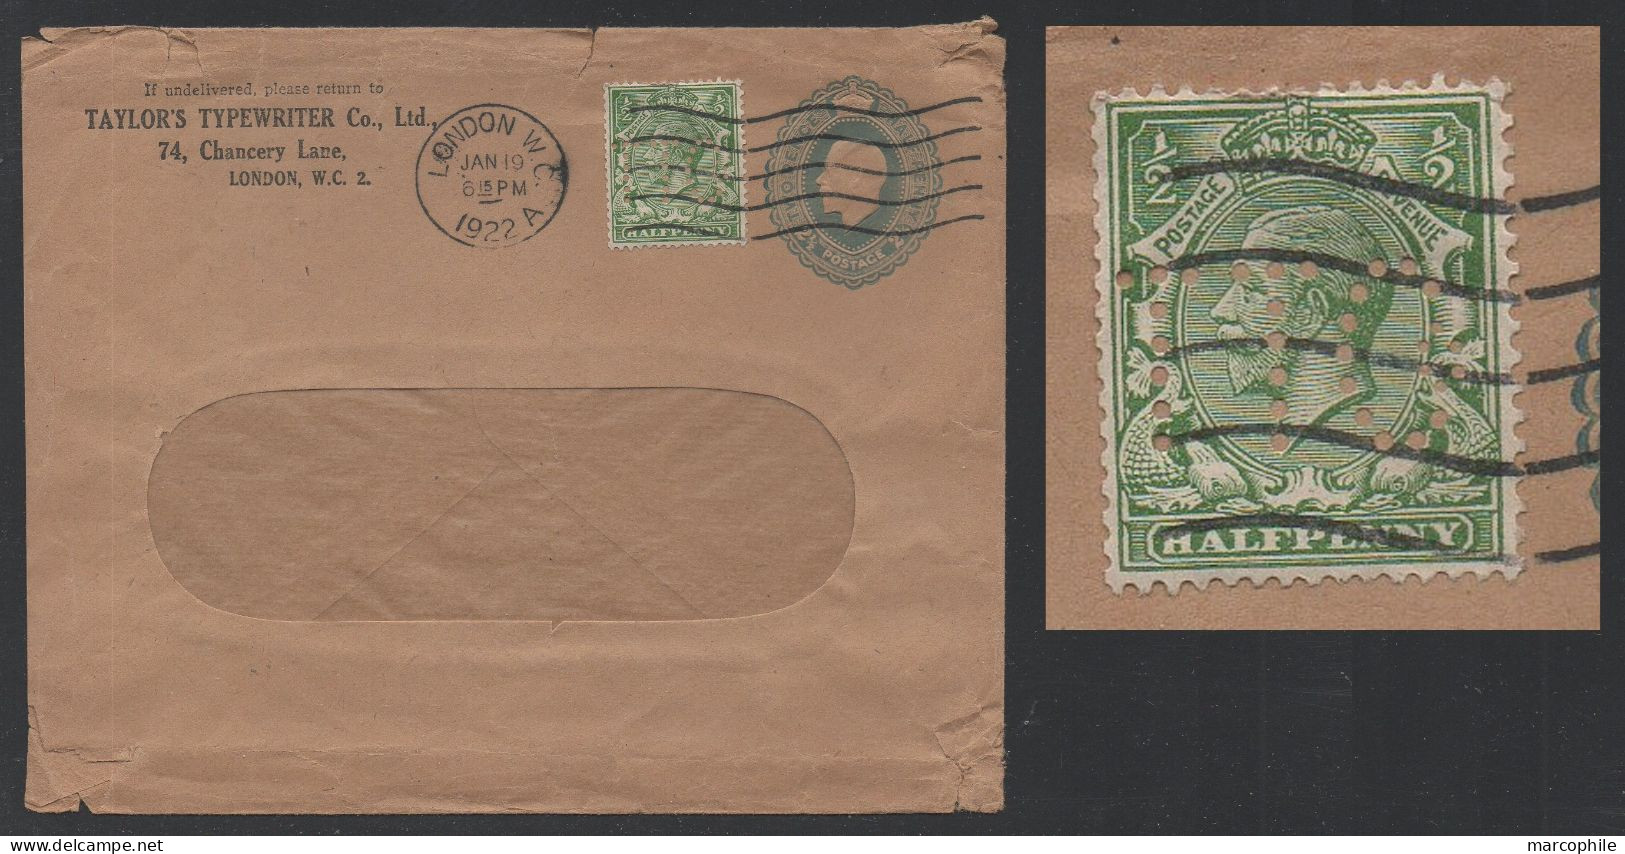 GB / 192 PERFIN "TTCo" (TAYLOR'S TYPEWRITER Co) WAX SEAL ON PRIVATE POSTAL STATIONERY ENVELOPE (ref 9012) - Perfins